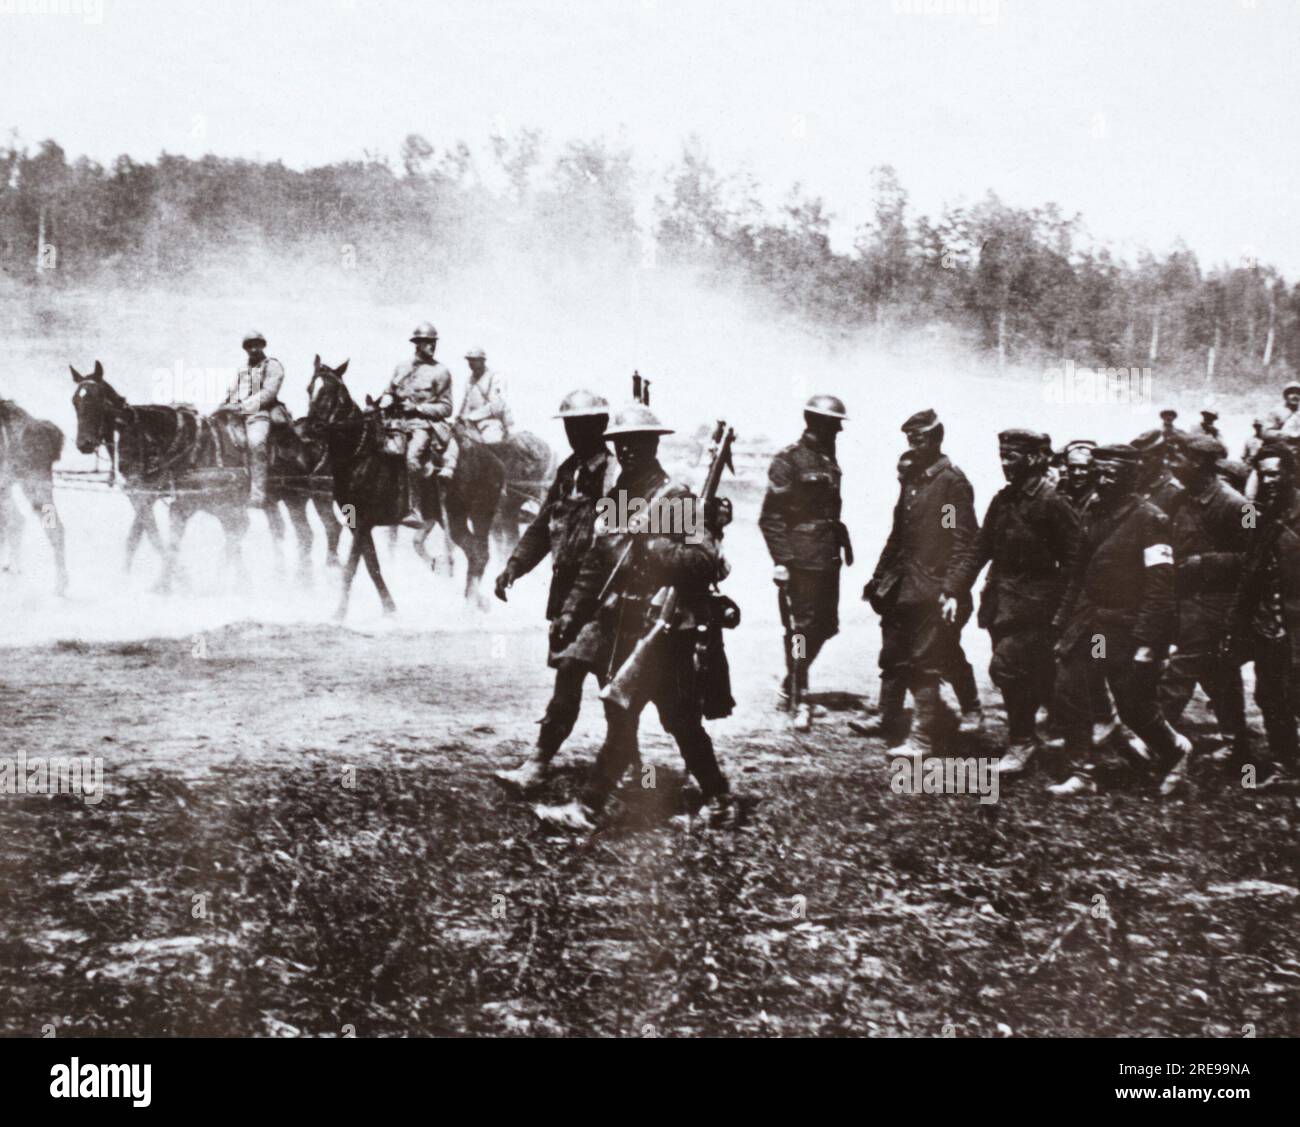 British soldiers escorting German prisoners captured during the advance on St Quentin on the Western Front during the First World War c.1918. Stock Photo